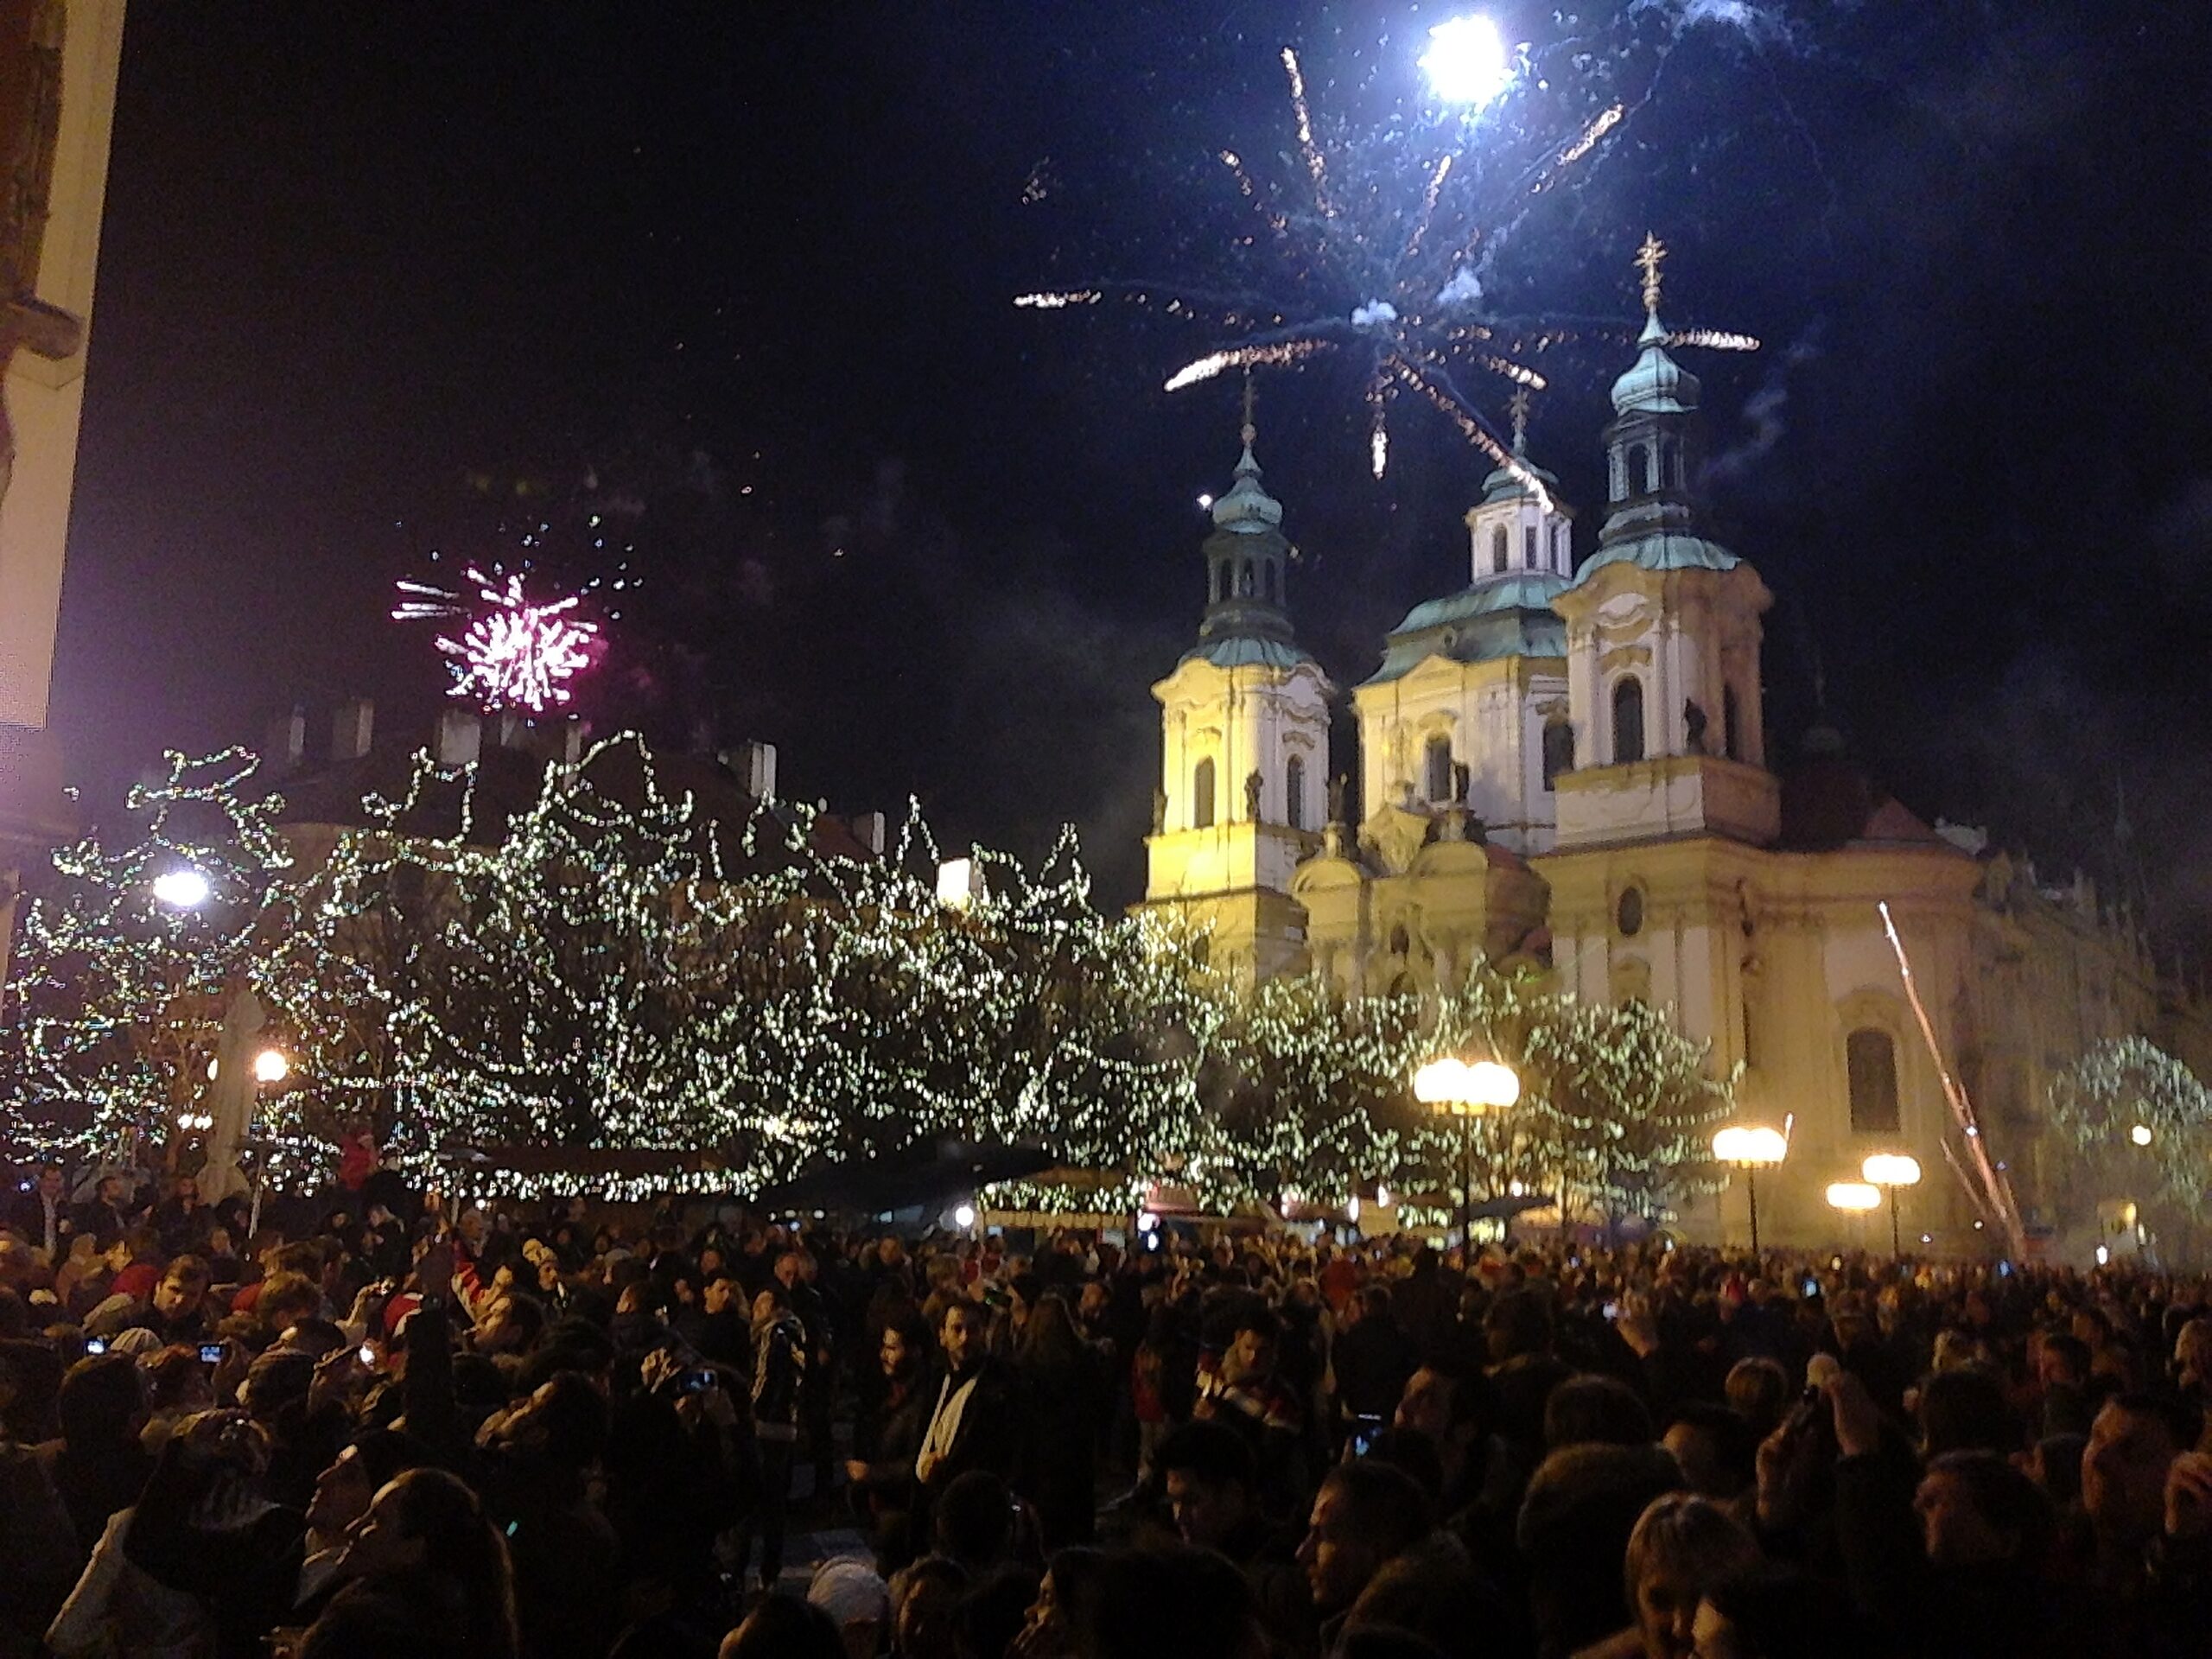 Amateur fireworks shows dazzle visitors to Prague's St. Nicholas Church in Old Town Square on New Year's Eve, 2012.